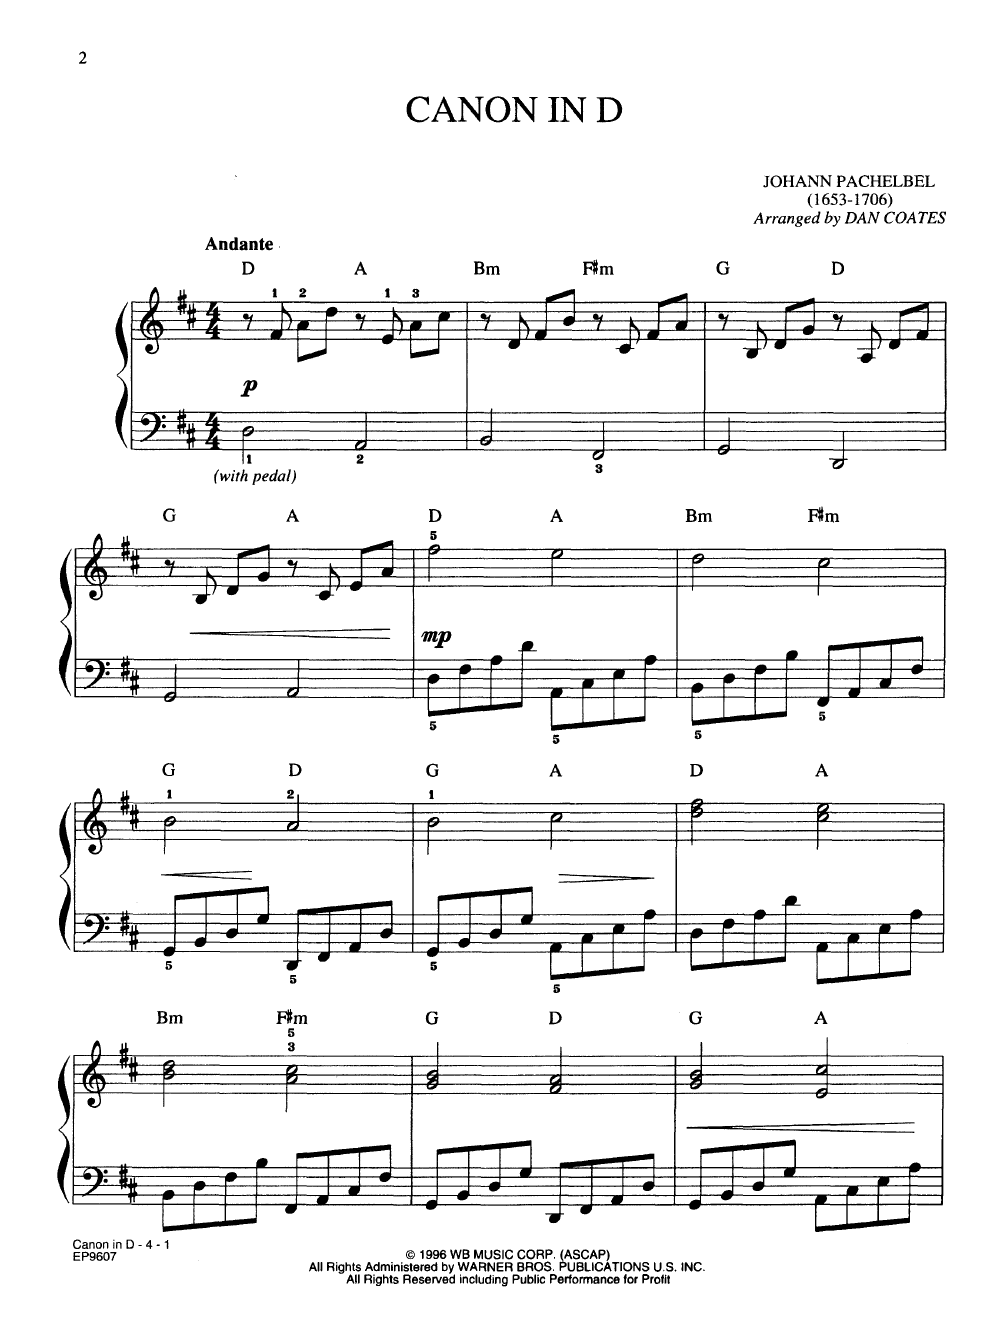 beginner-canon-in-d-piano-sheet-music-free-printable-canon-in-d-by-pachelbel-free-piano-sheet